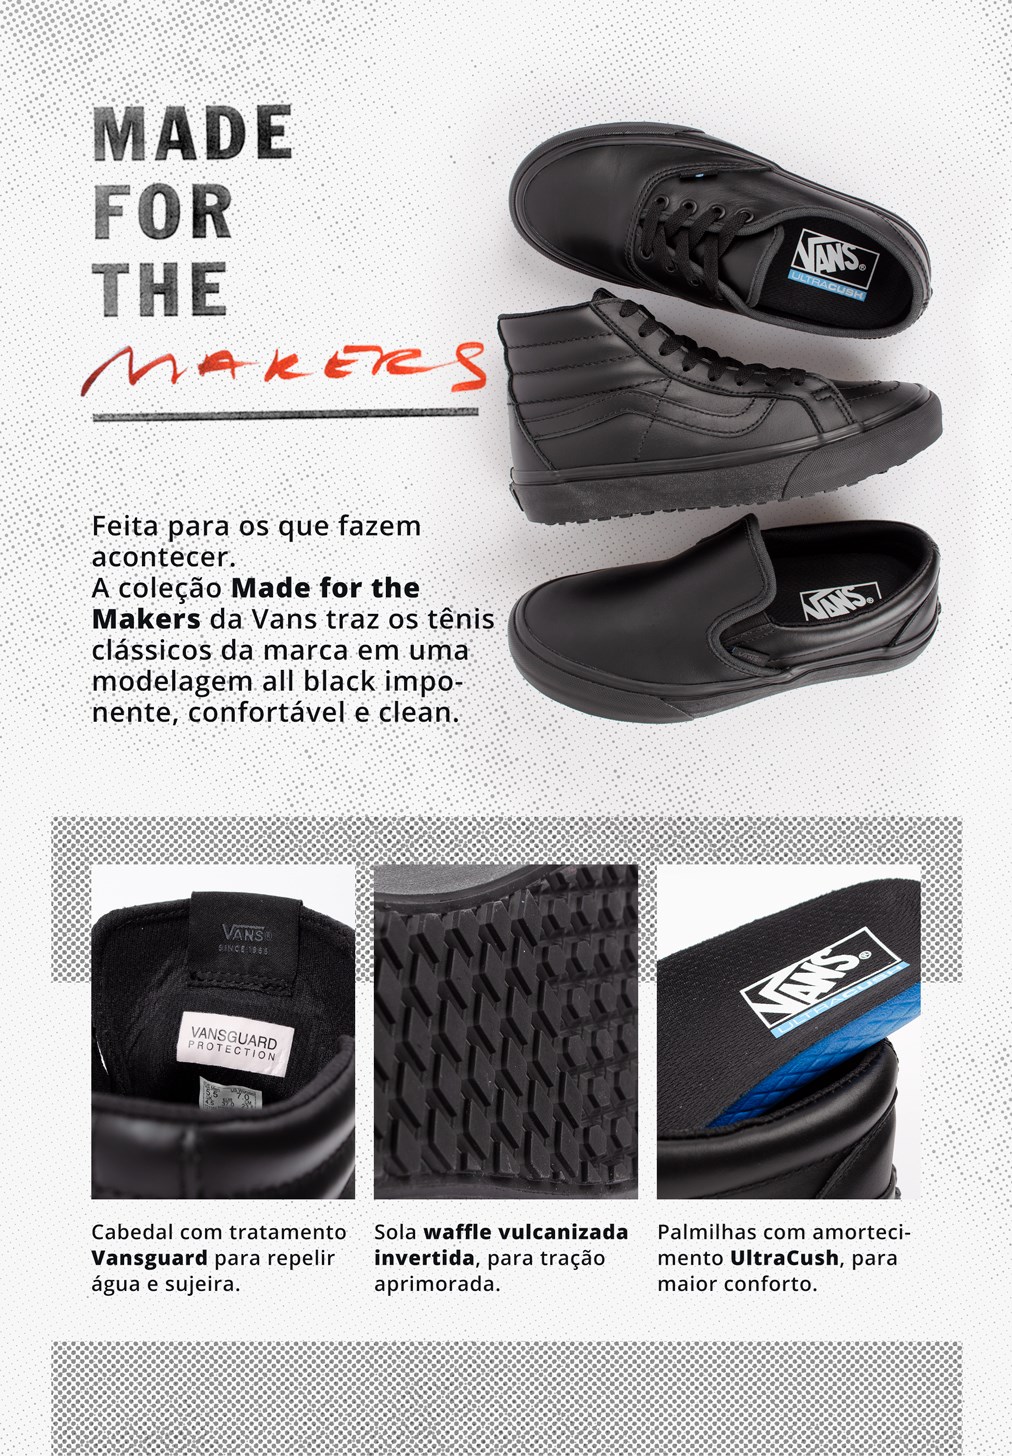 Lamina Colla Vans Made For The Makers